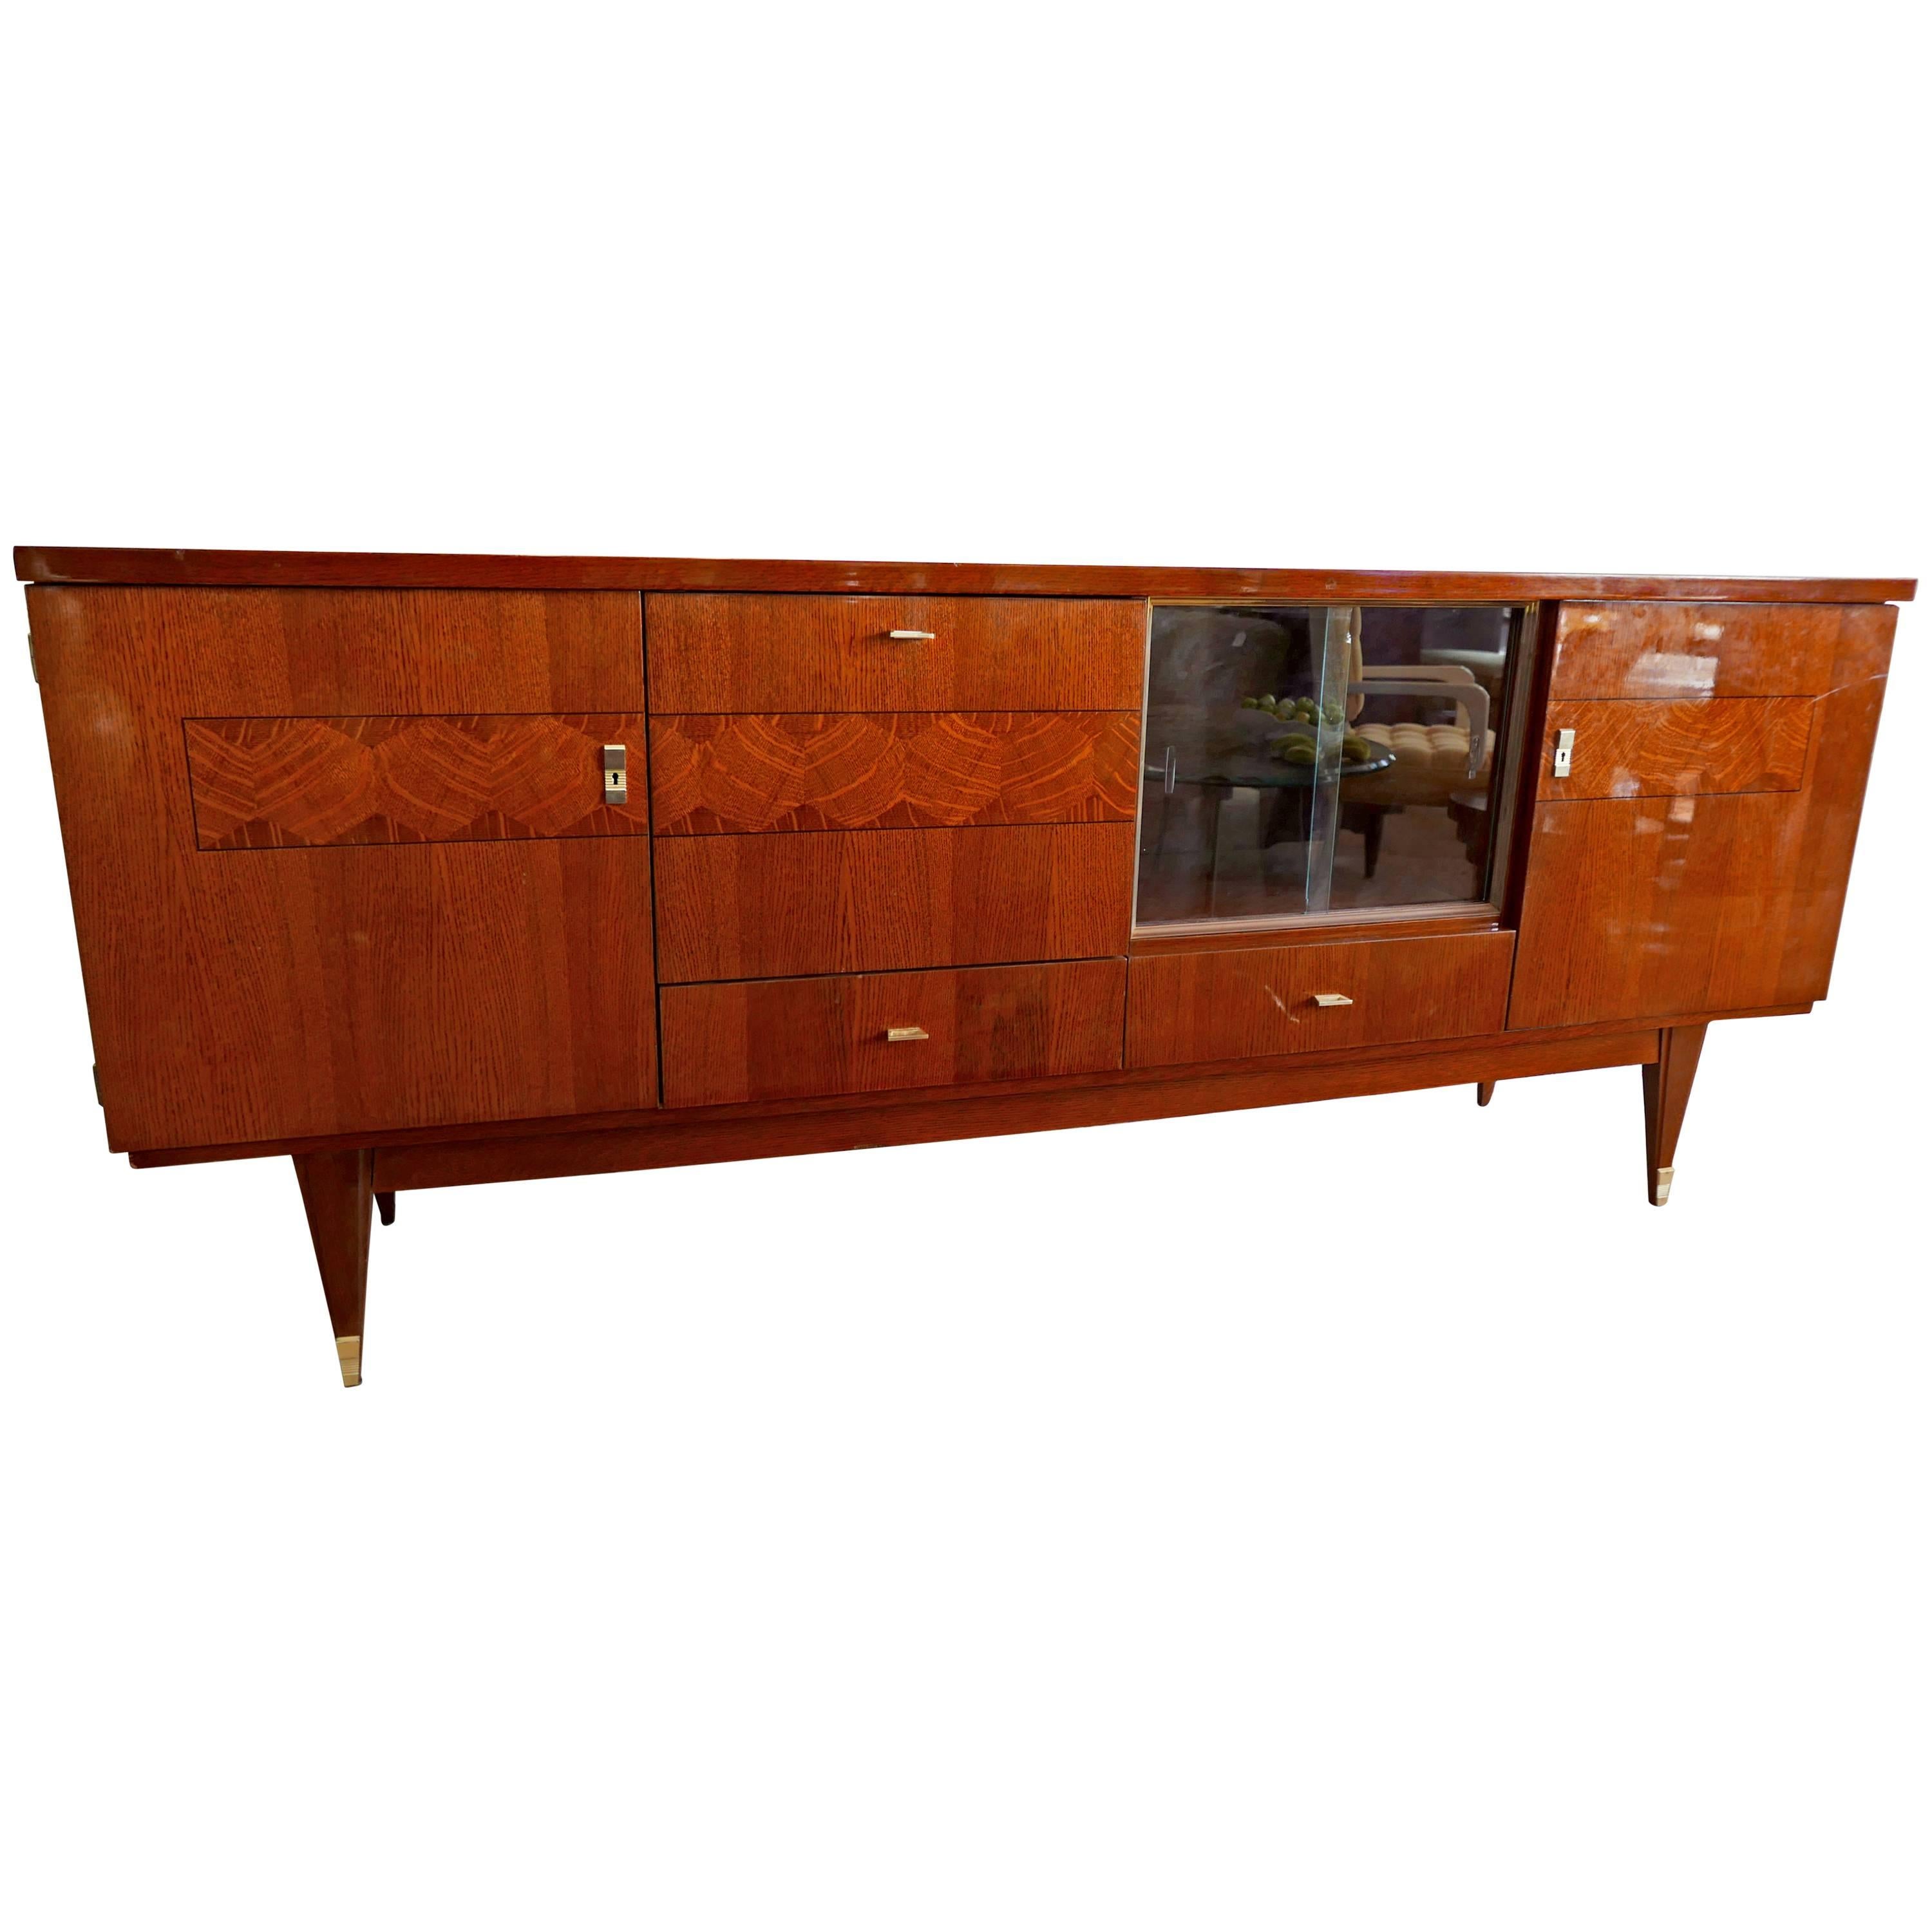 Credenza or Bar from France, 1930s Art Deco Period